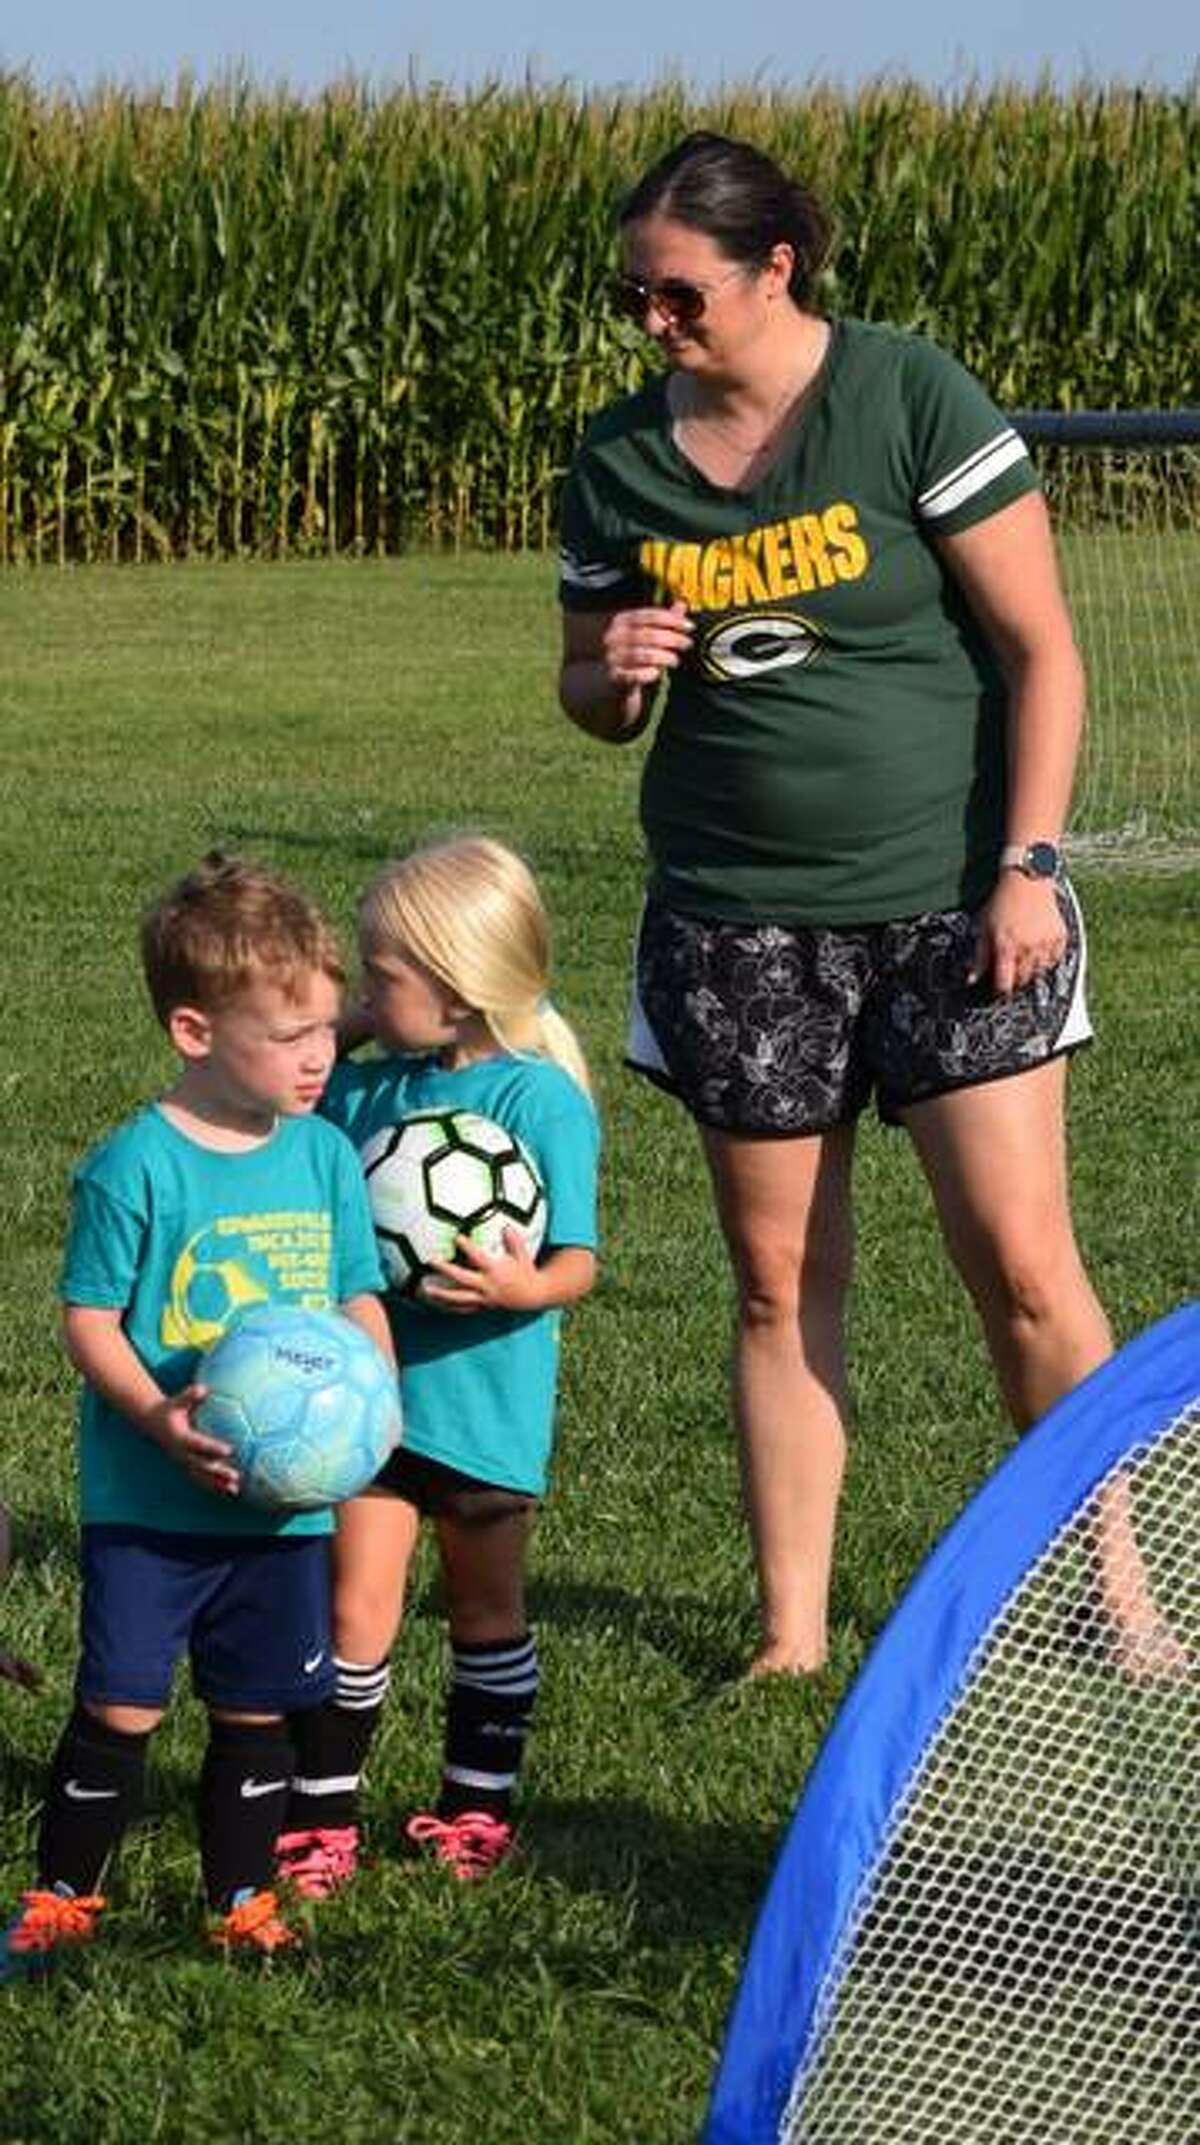 PeeWee soccer is a new camp offered by the Edwardsville YMCA Meyer Center. On Wednesday, the group kicked off week two of the seven-week program geared toward getting 3-years-old children active and teaching them how to play the sport.